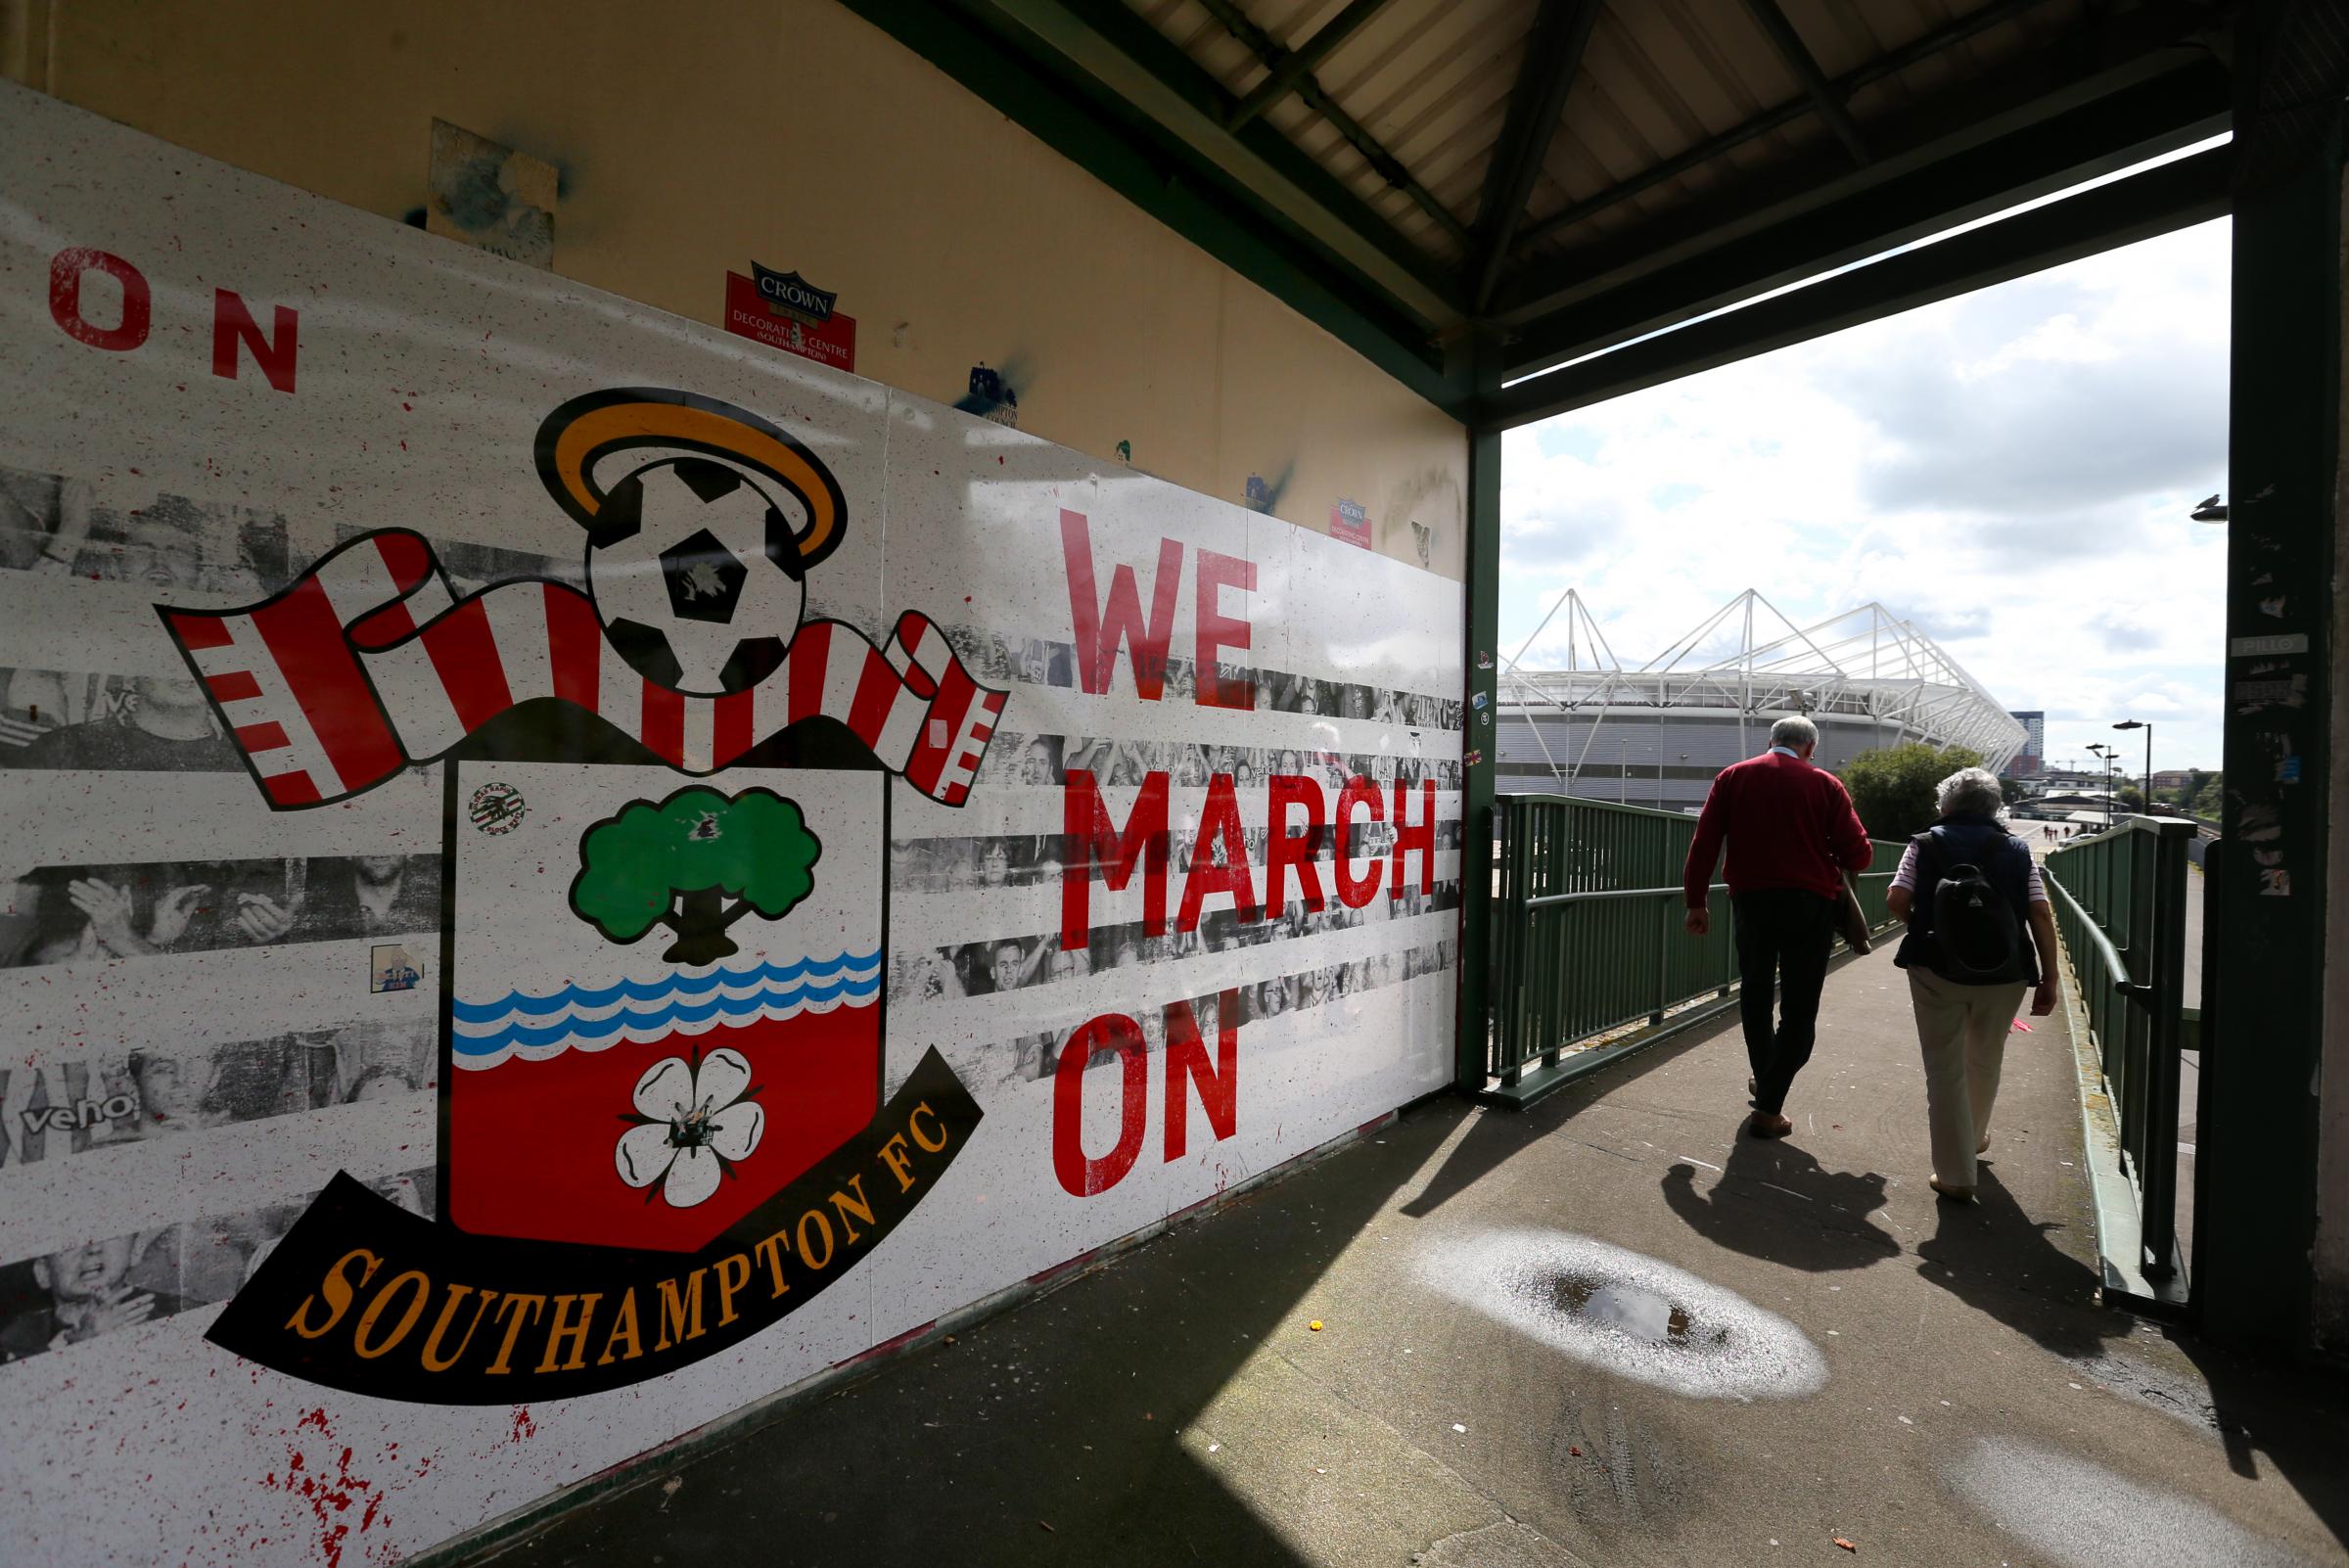 Southampton have pledged 12,000 free meals amid the Covid-19 pandemic